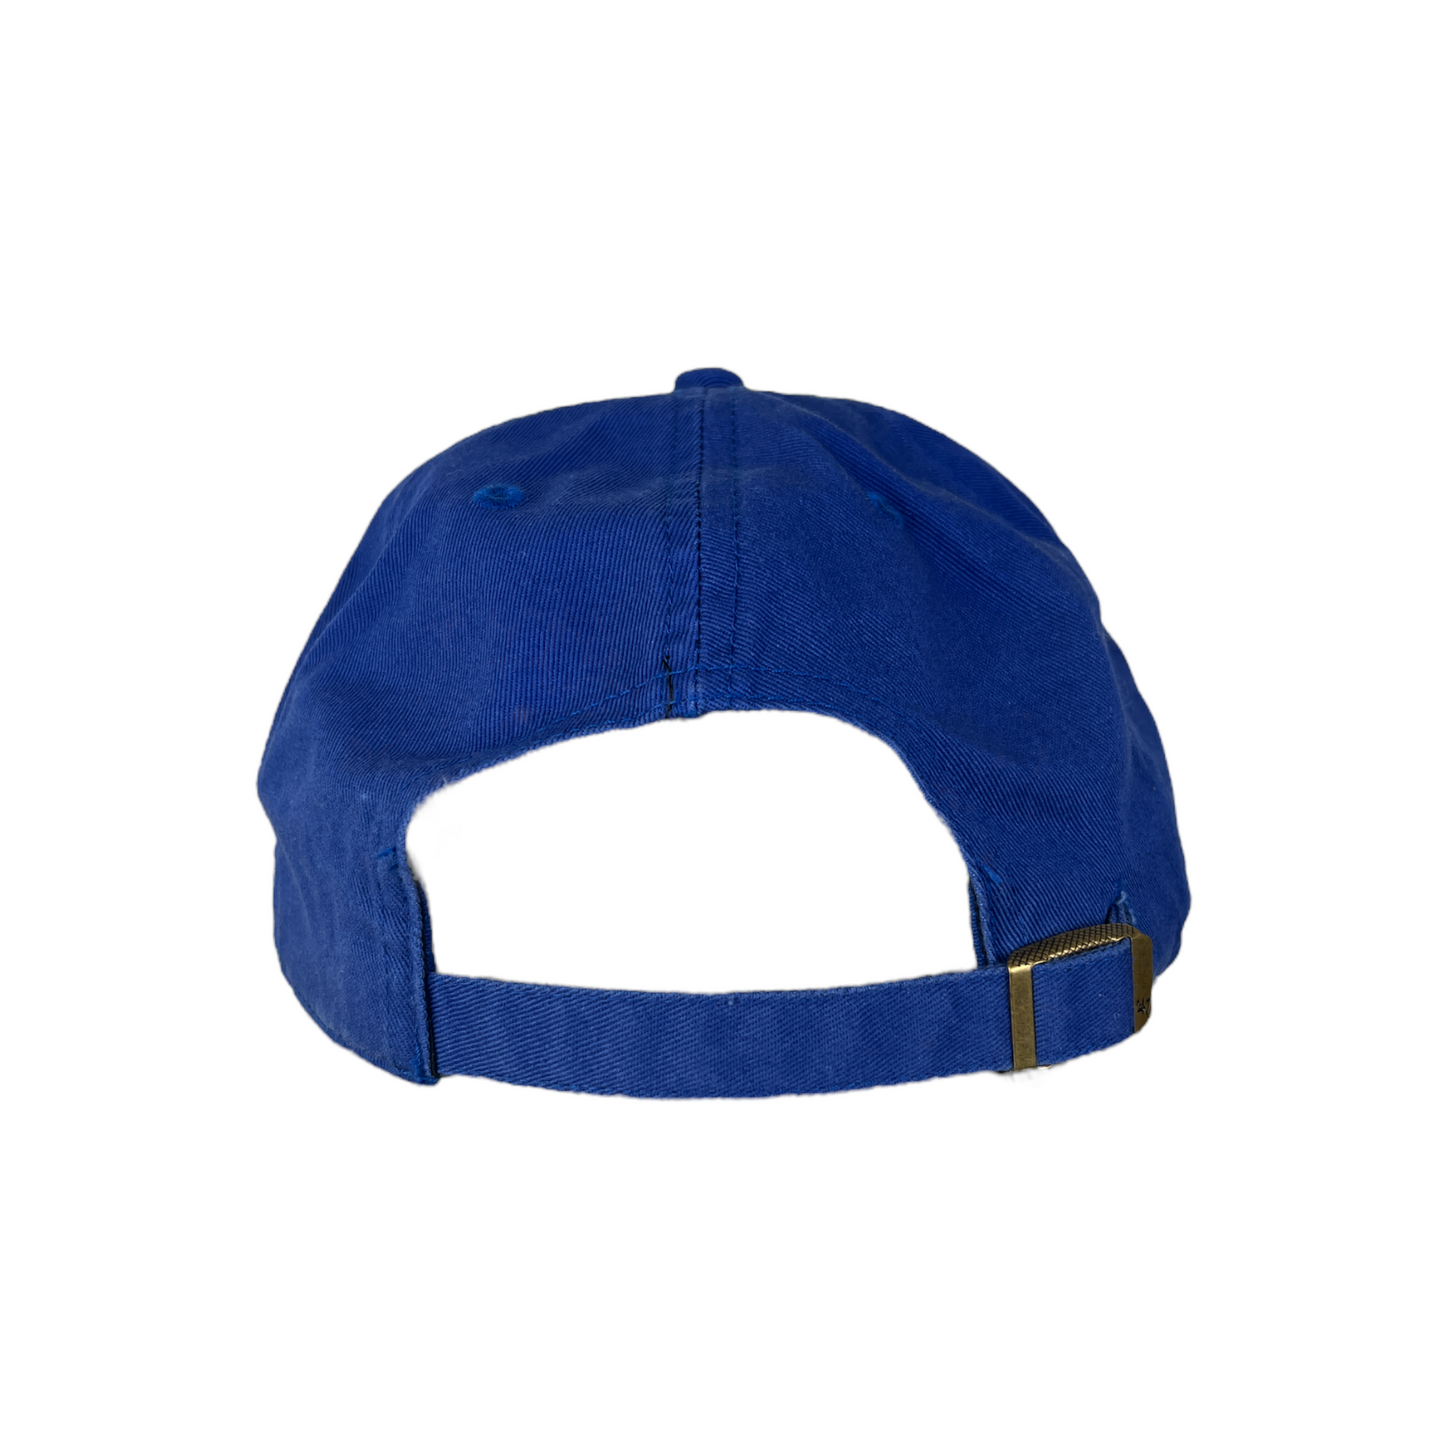 Adjustable back for the Minor league baseball dad hat for the DubSea Fish Sticks.